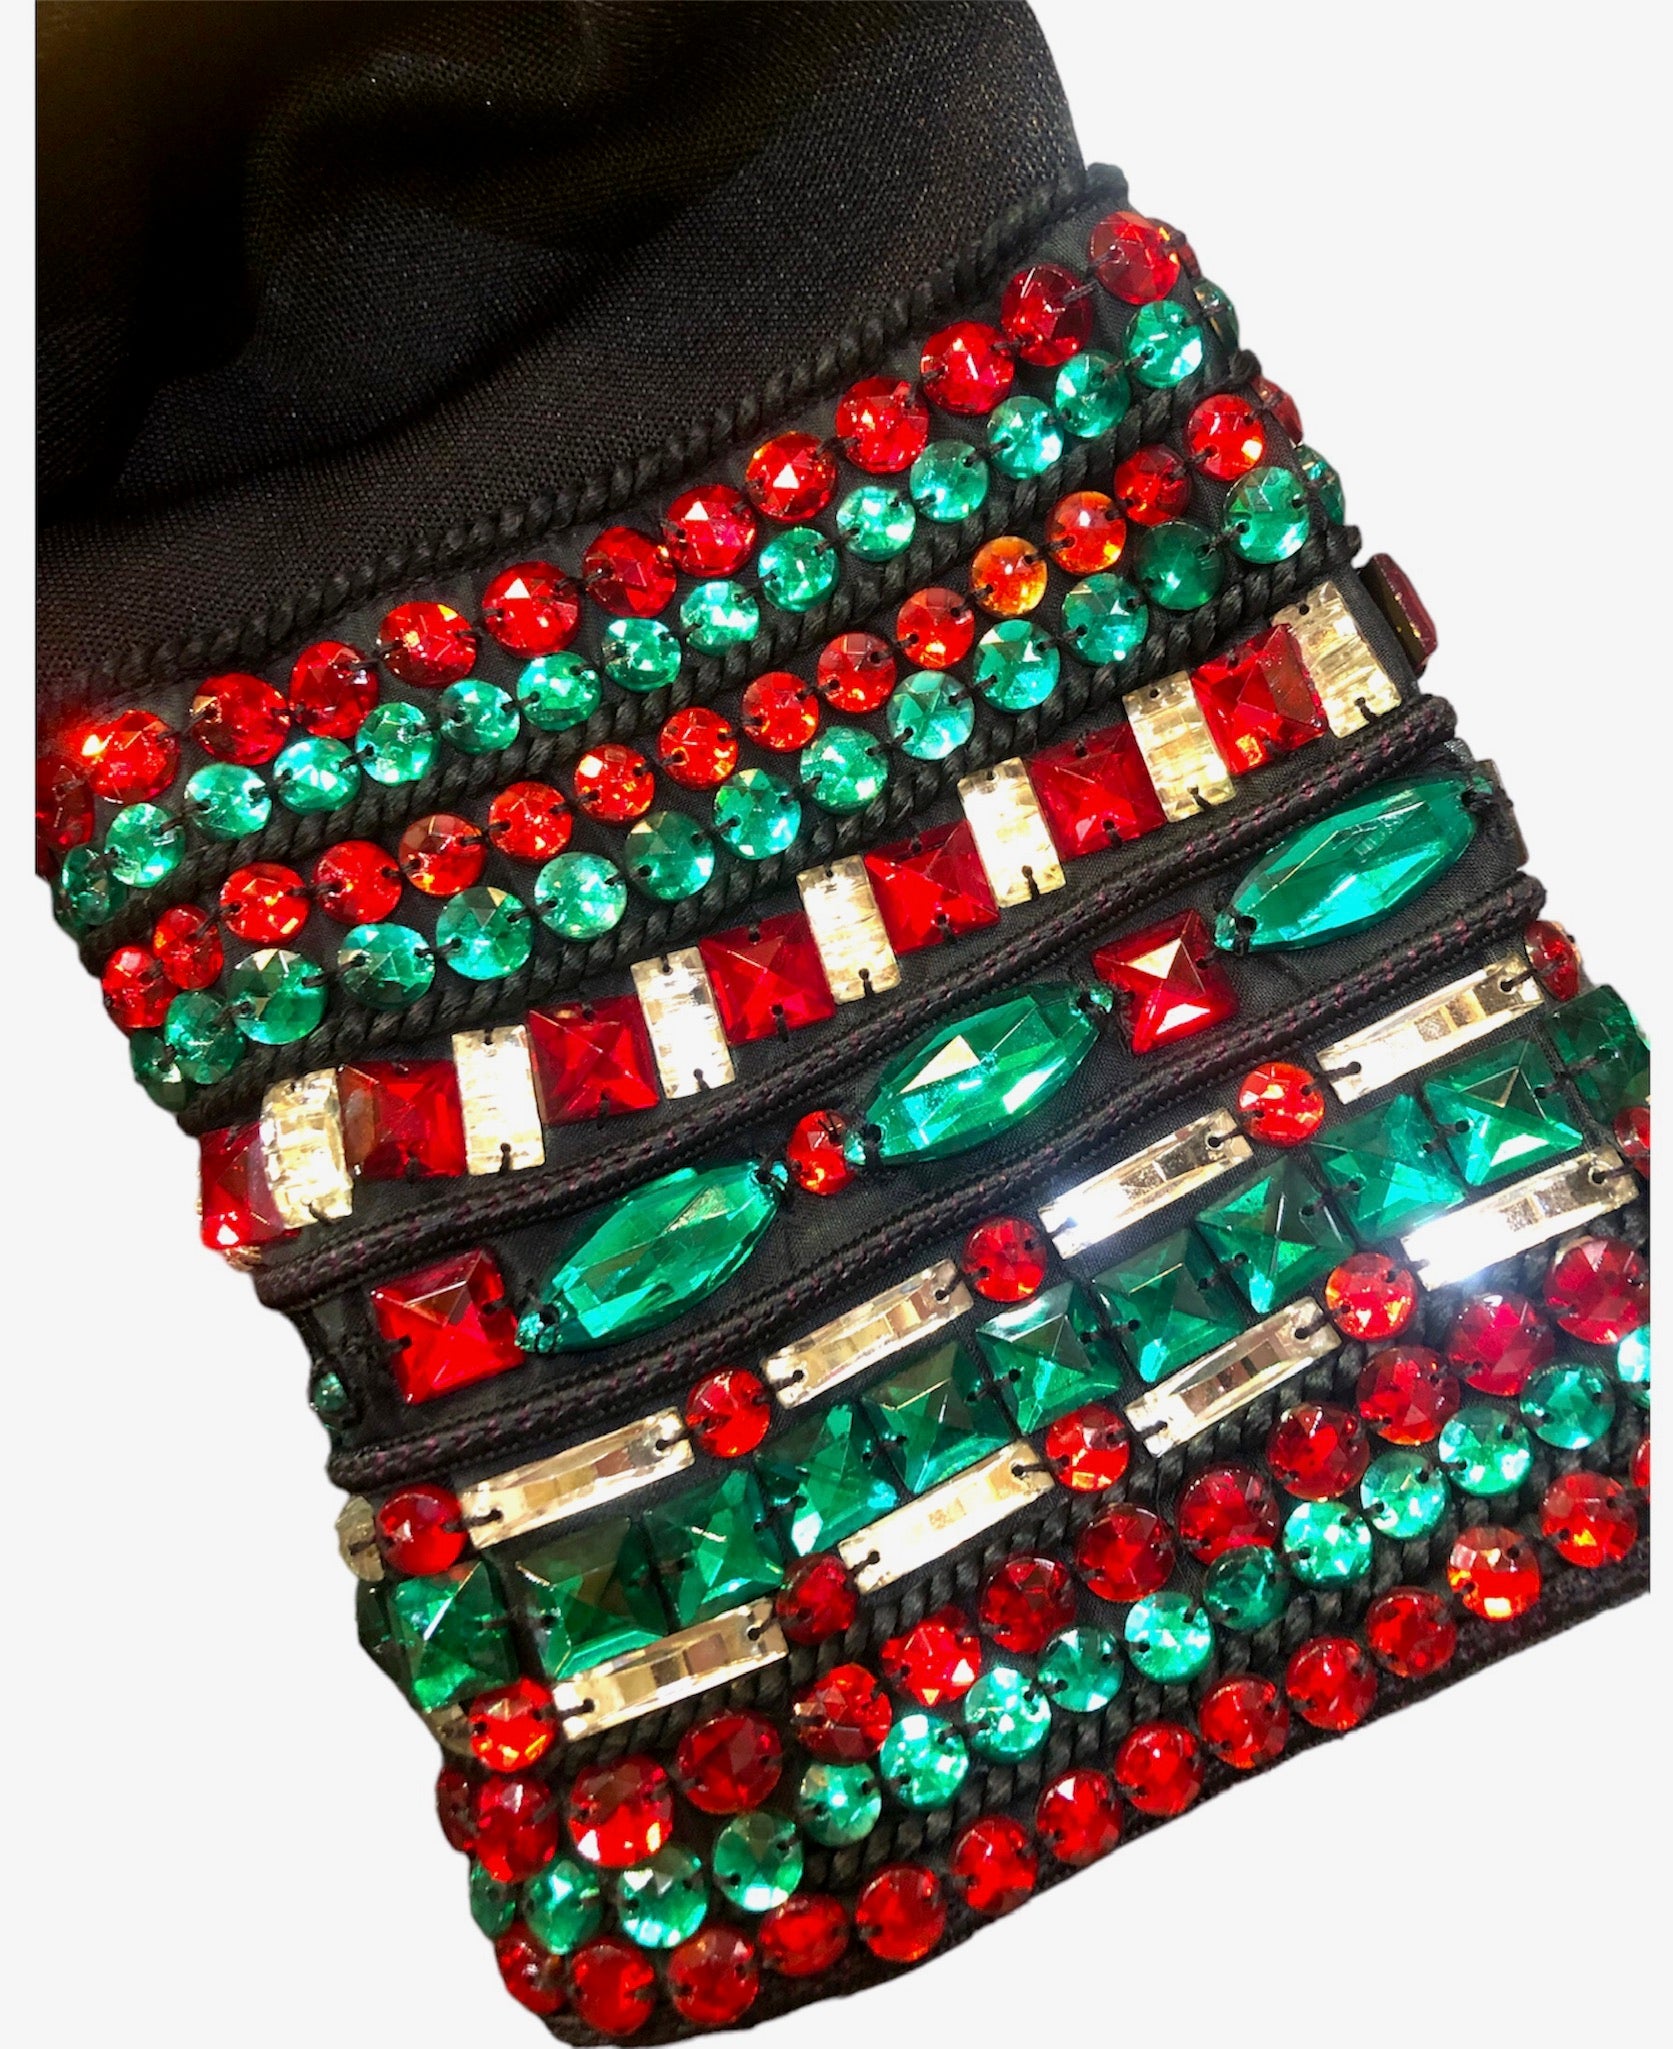  YSL Rive Gauche 80s Black Tunic with Red & Green Faux Gems DETAIL 4 of 5